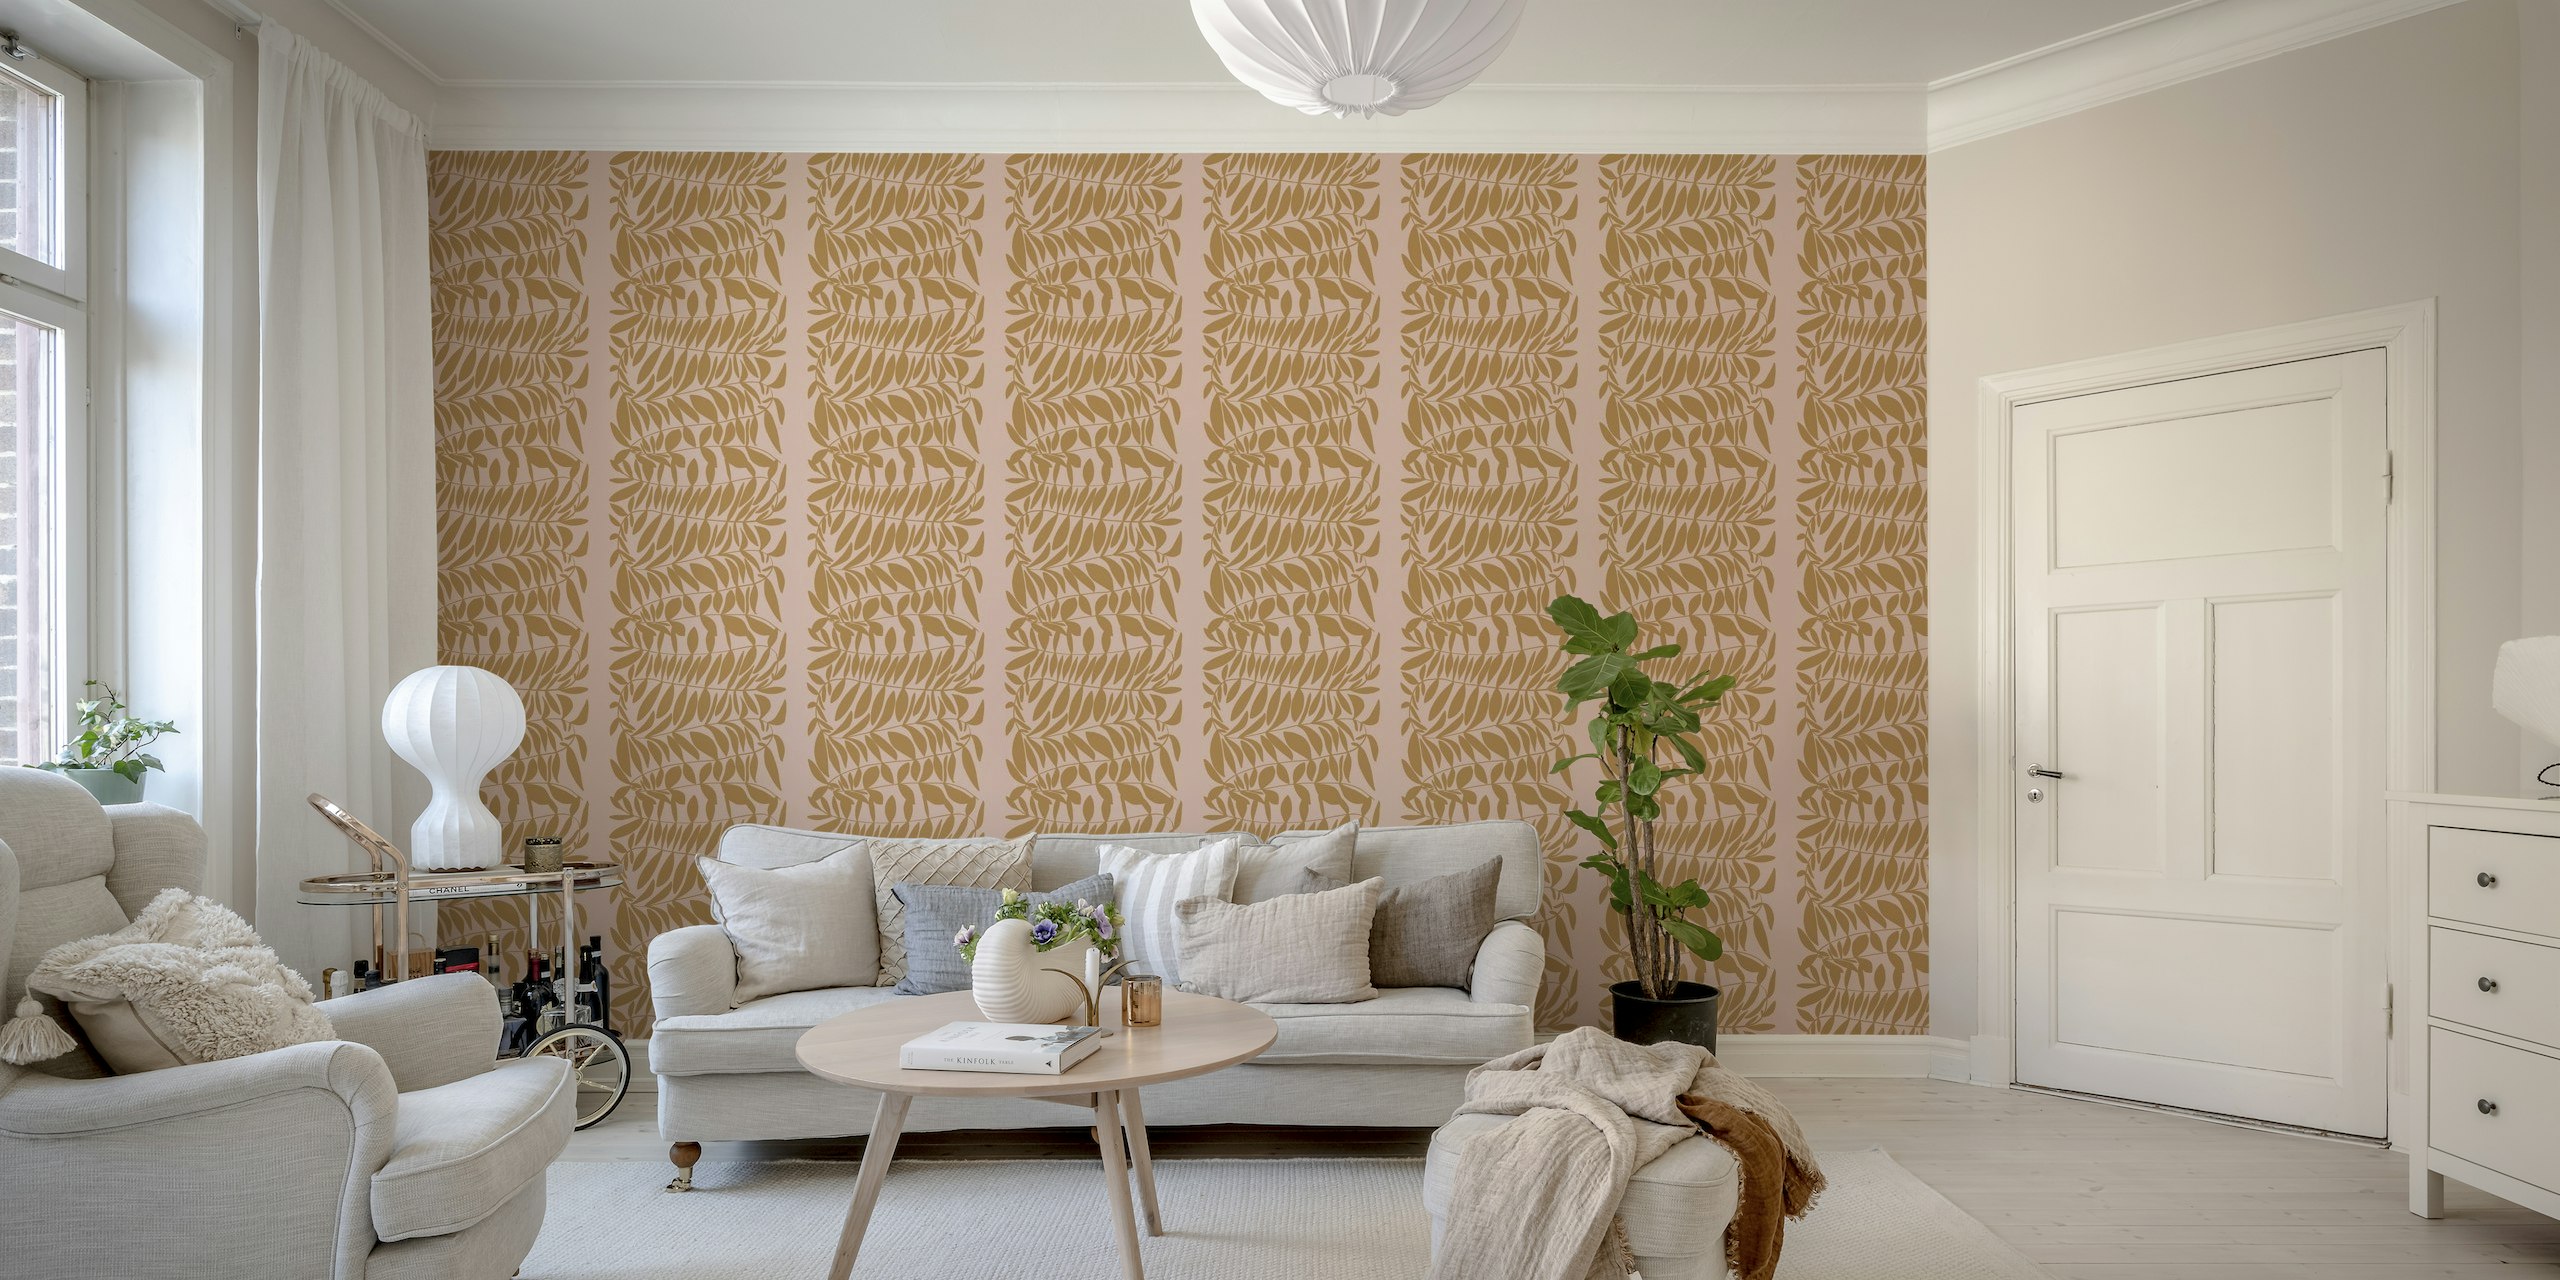 Botanical zarcillo vine wall mural on a clay-colored background